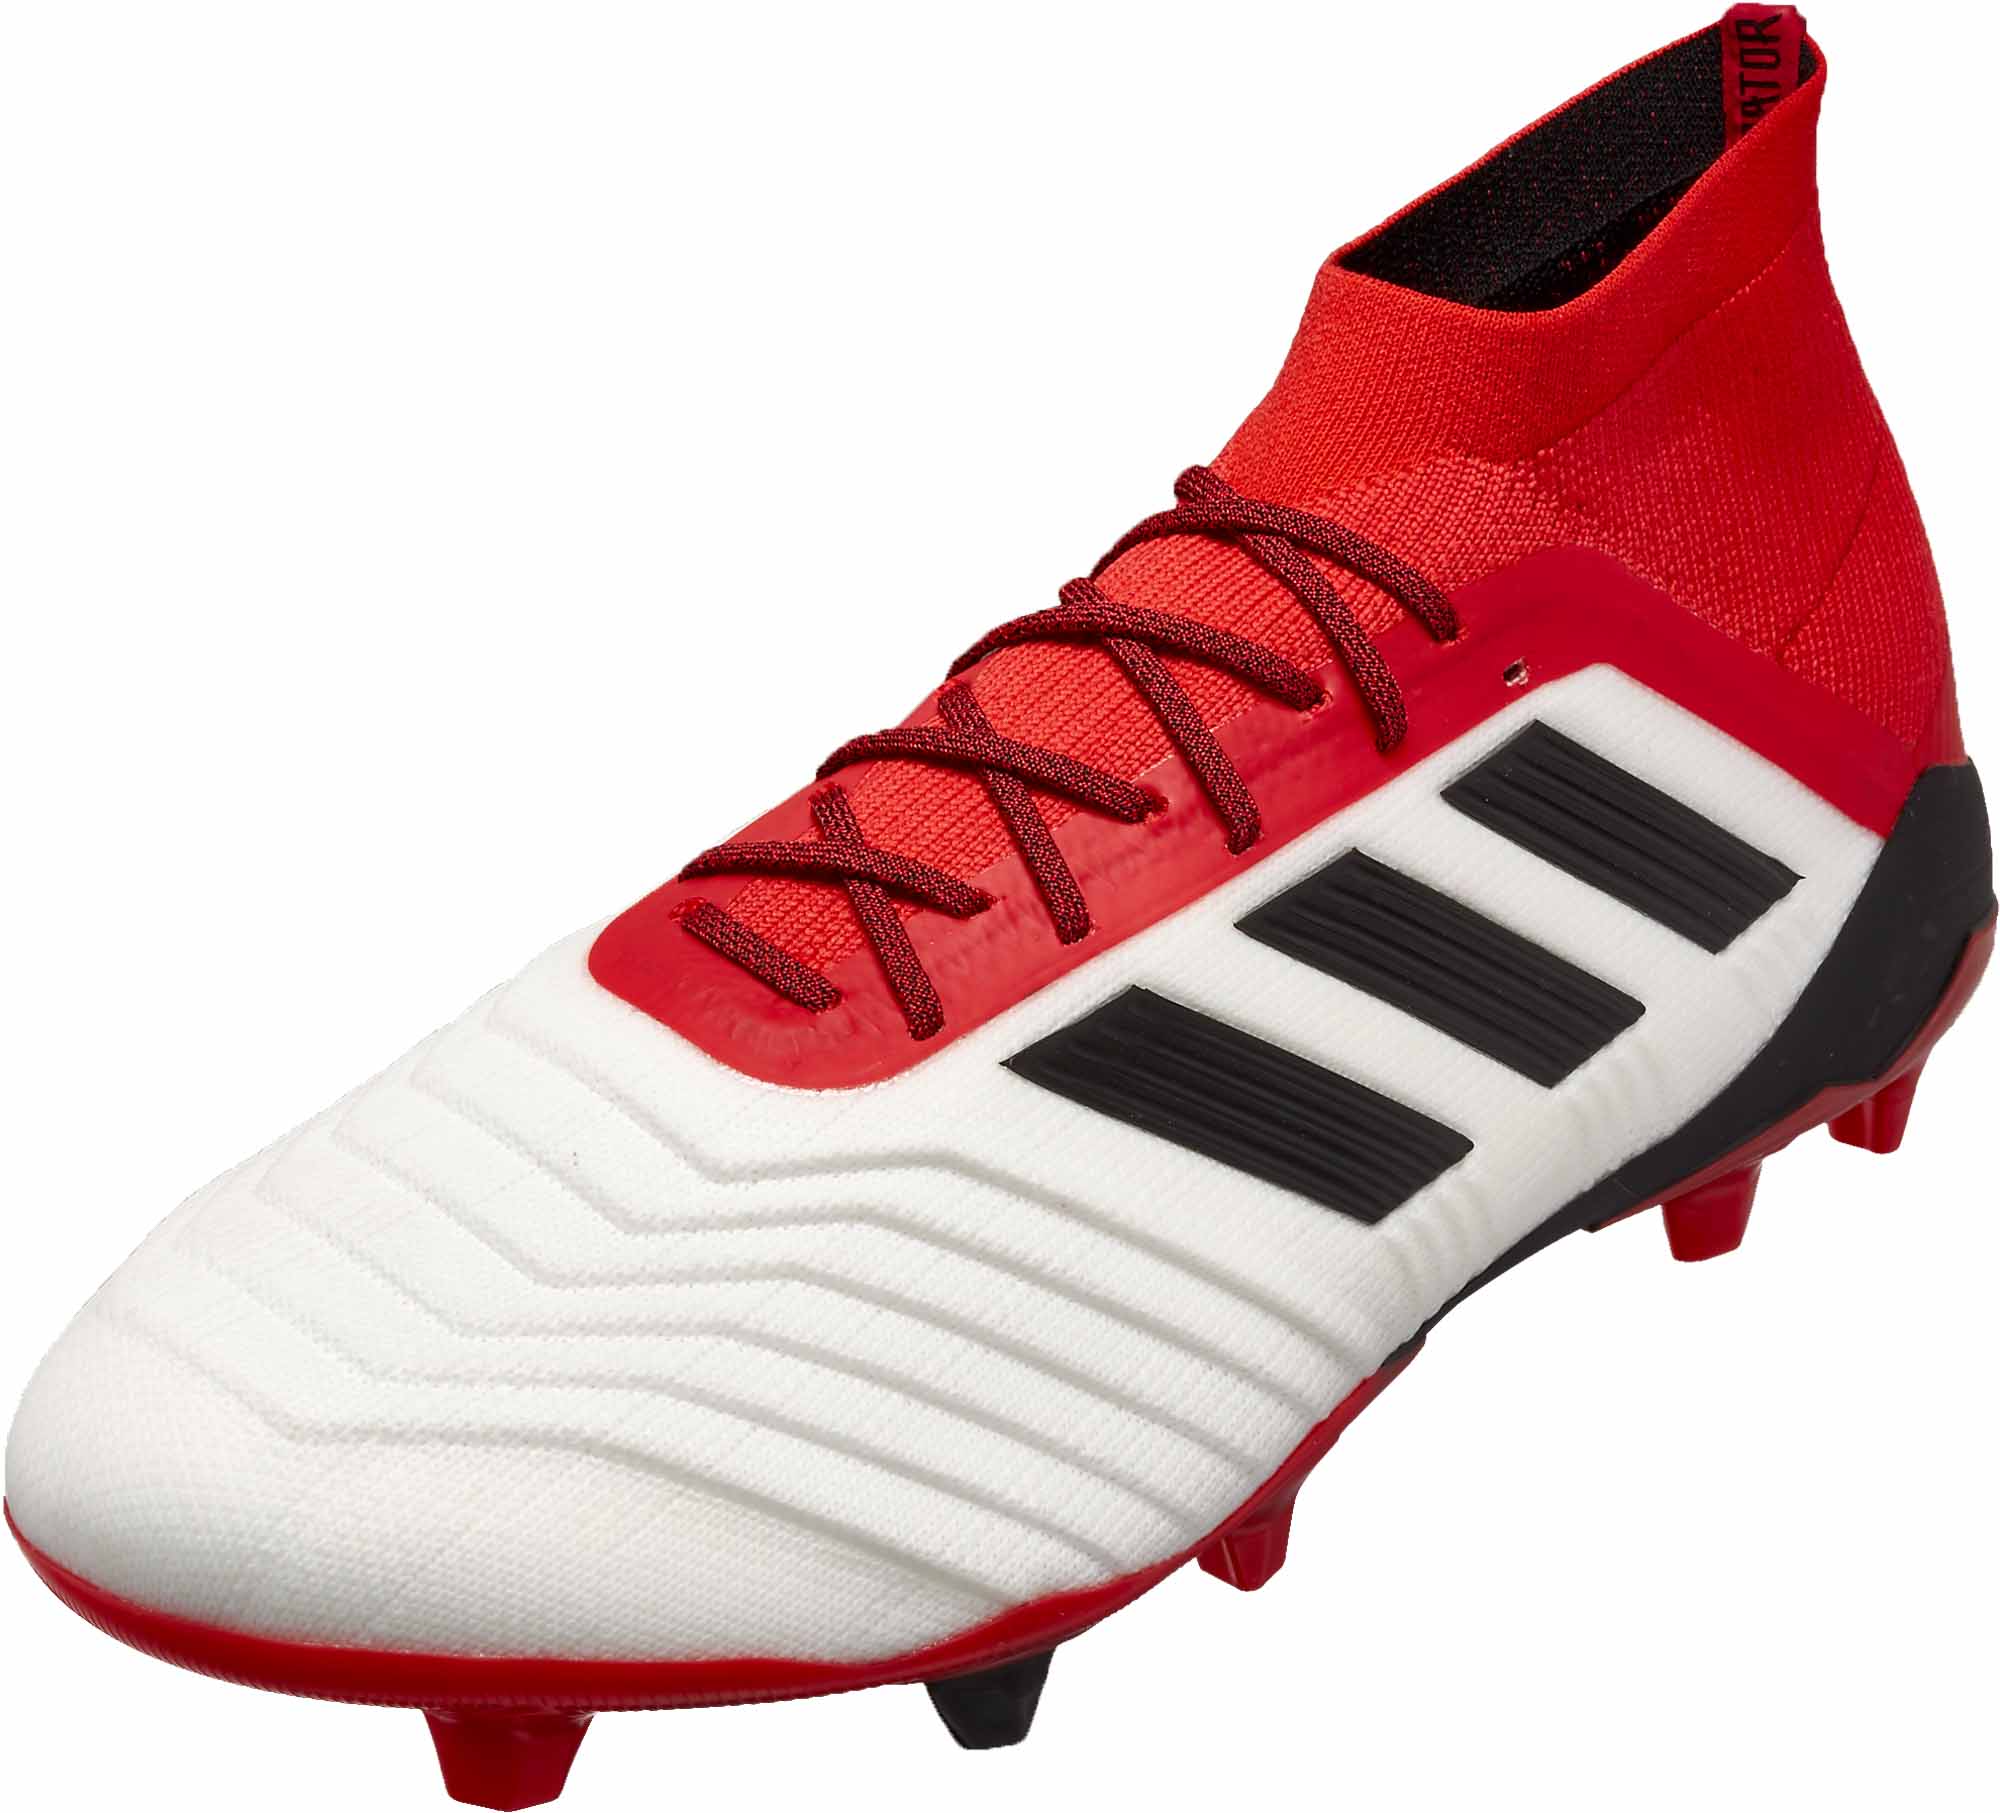 adidas Predator 18.1 - Cold Blooded Pack